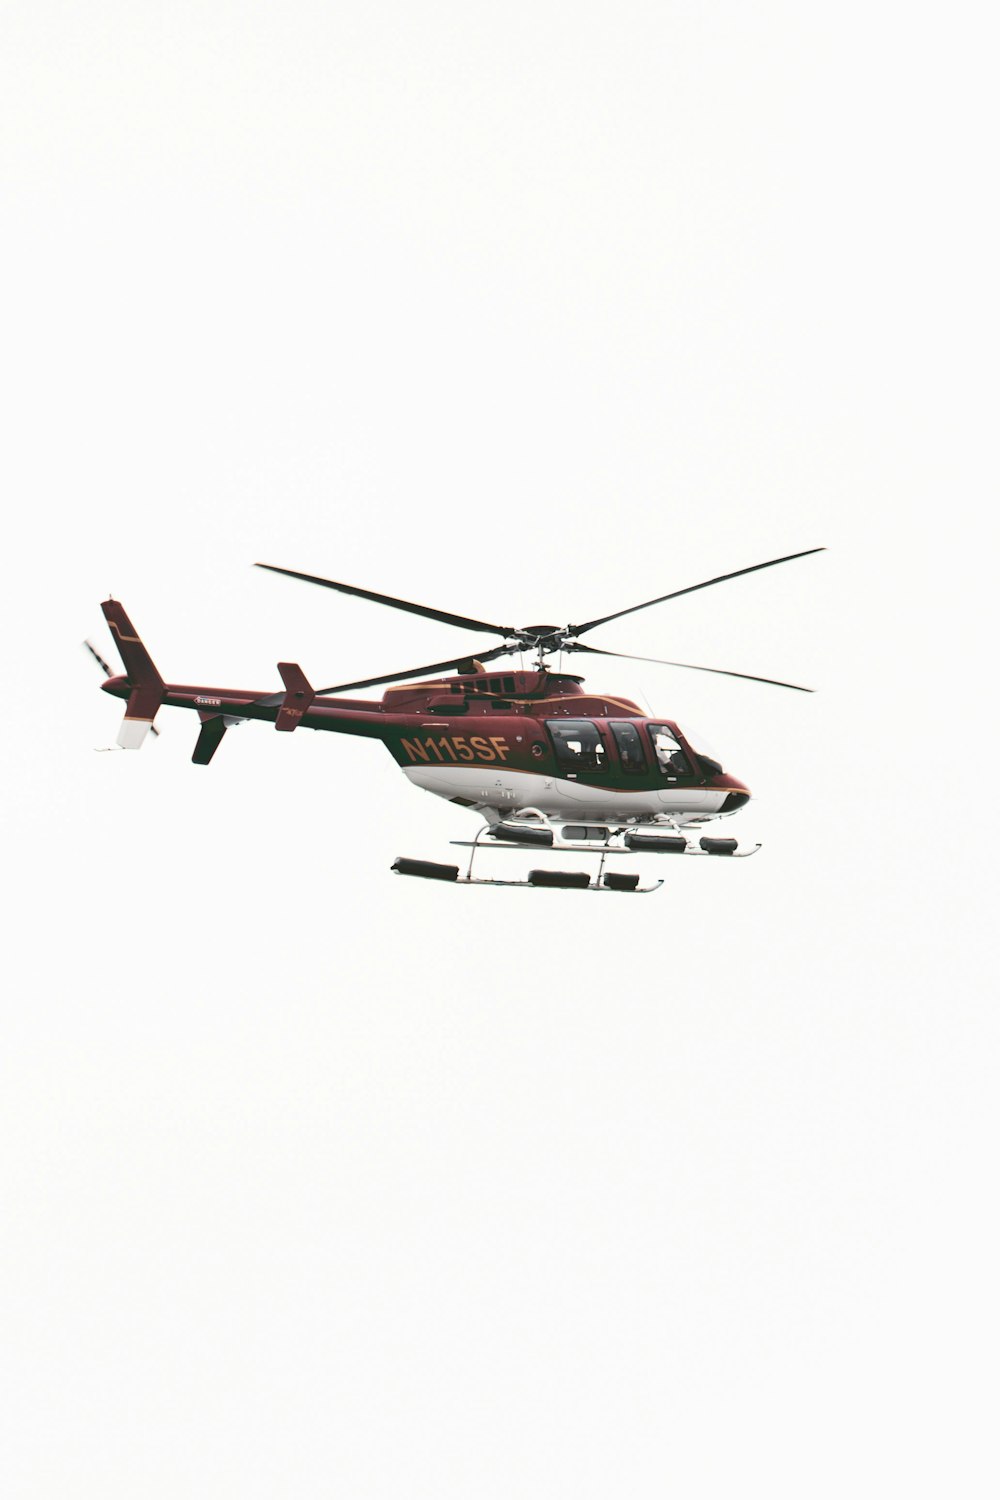 a helicopter flying in the air with a sky background